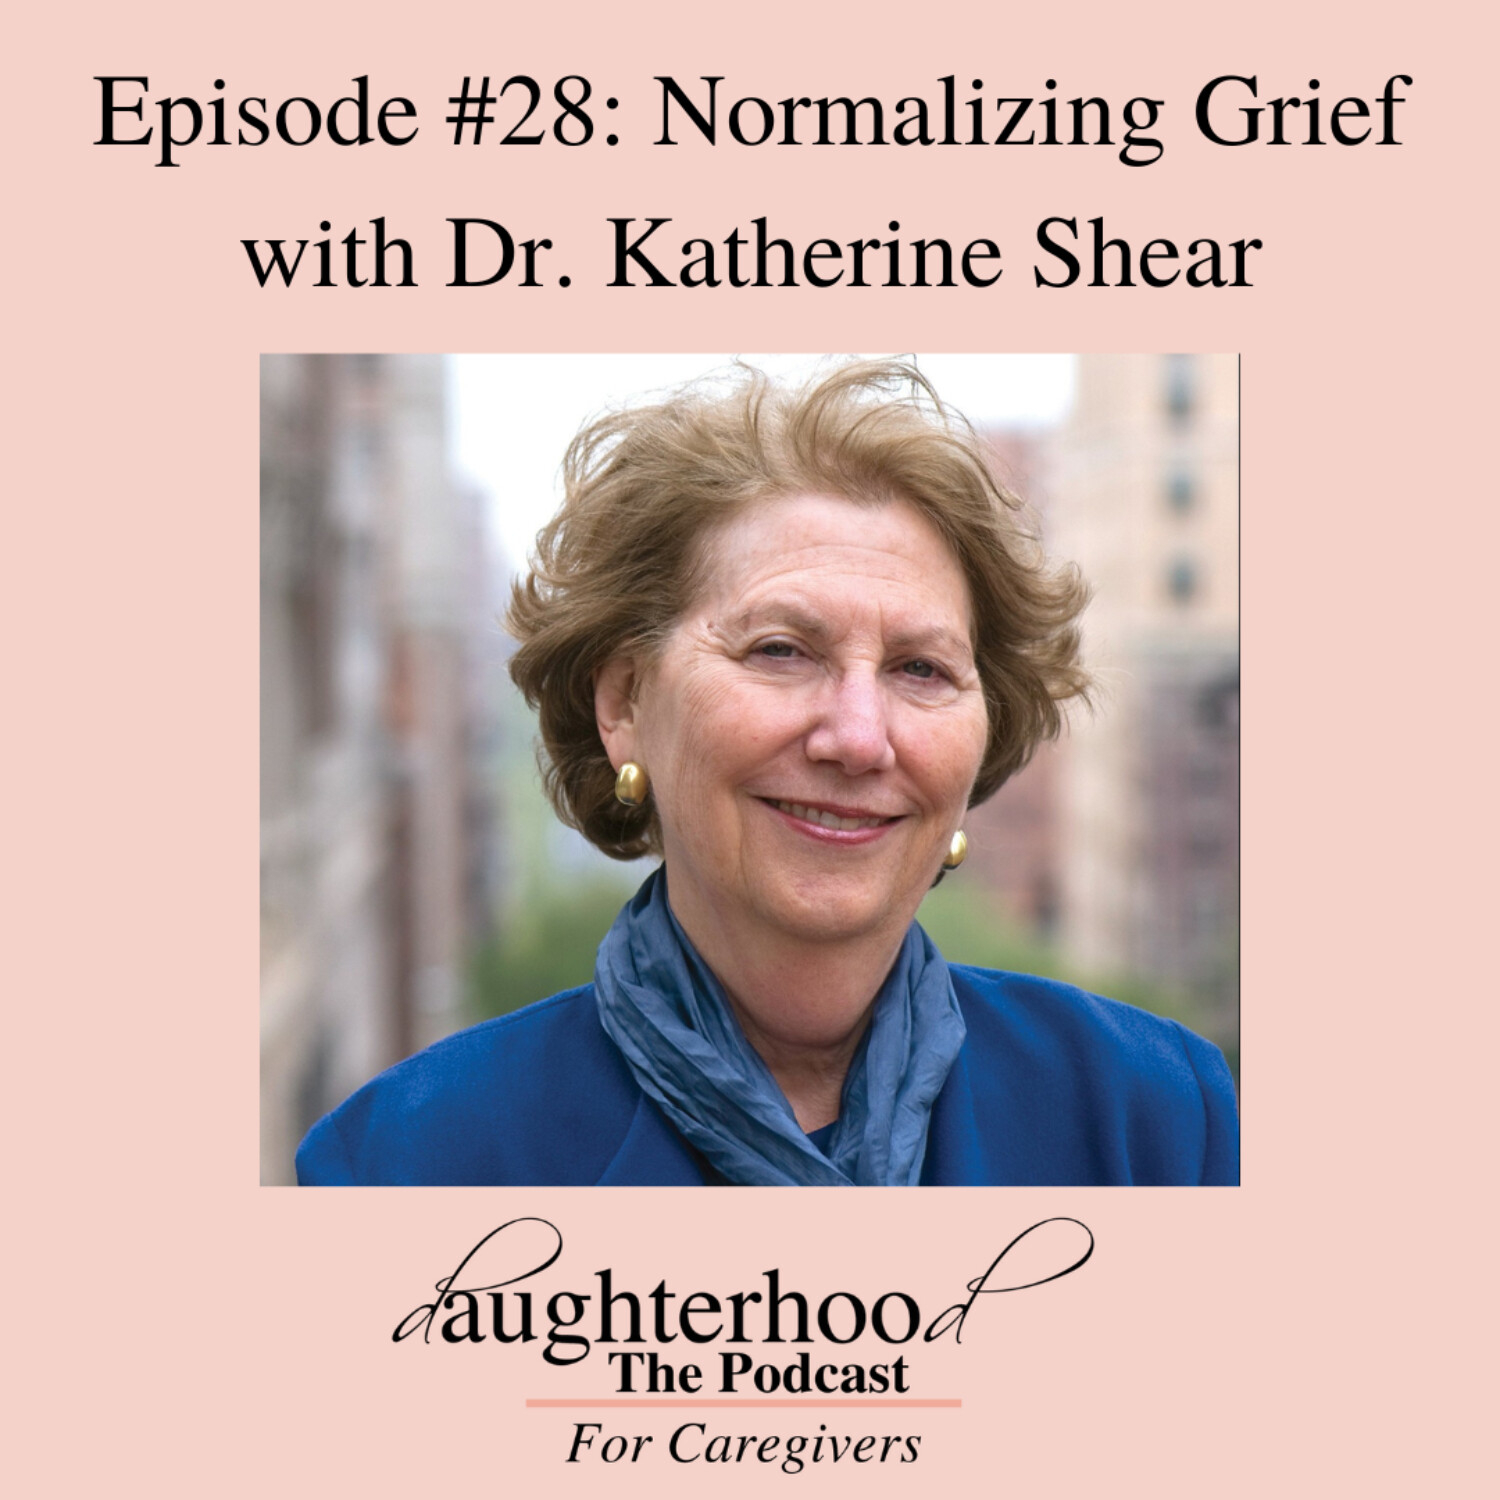 Normalizing Grief with Dr Katherine Shear